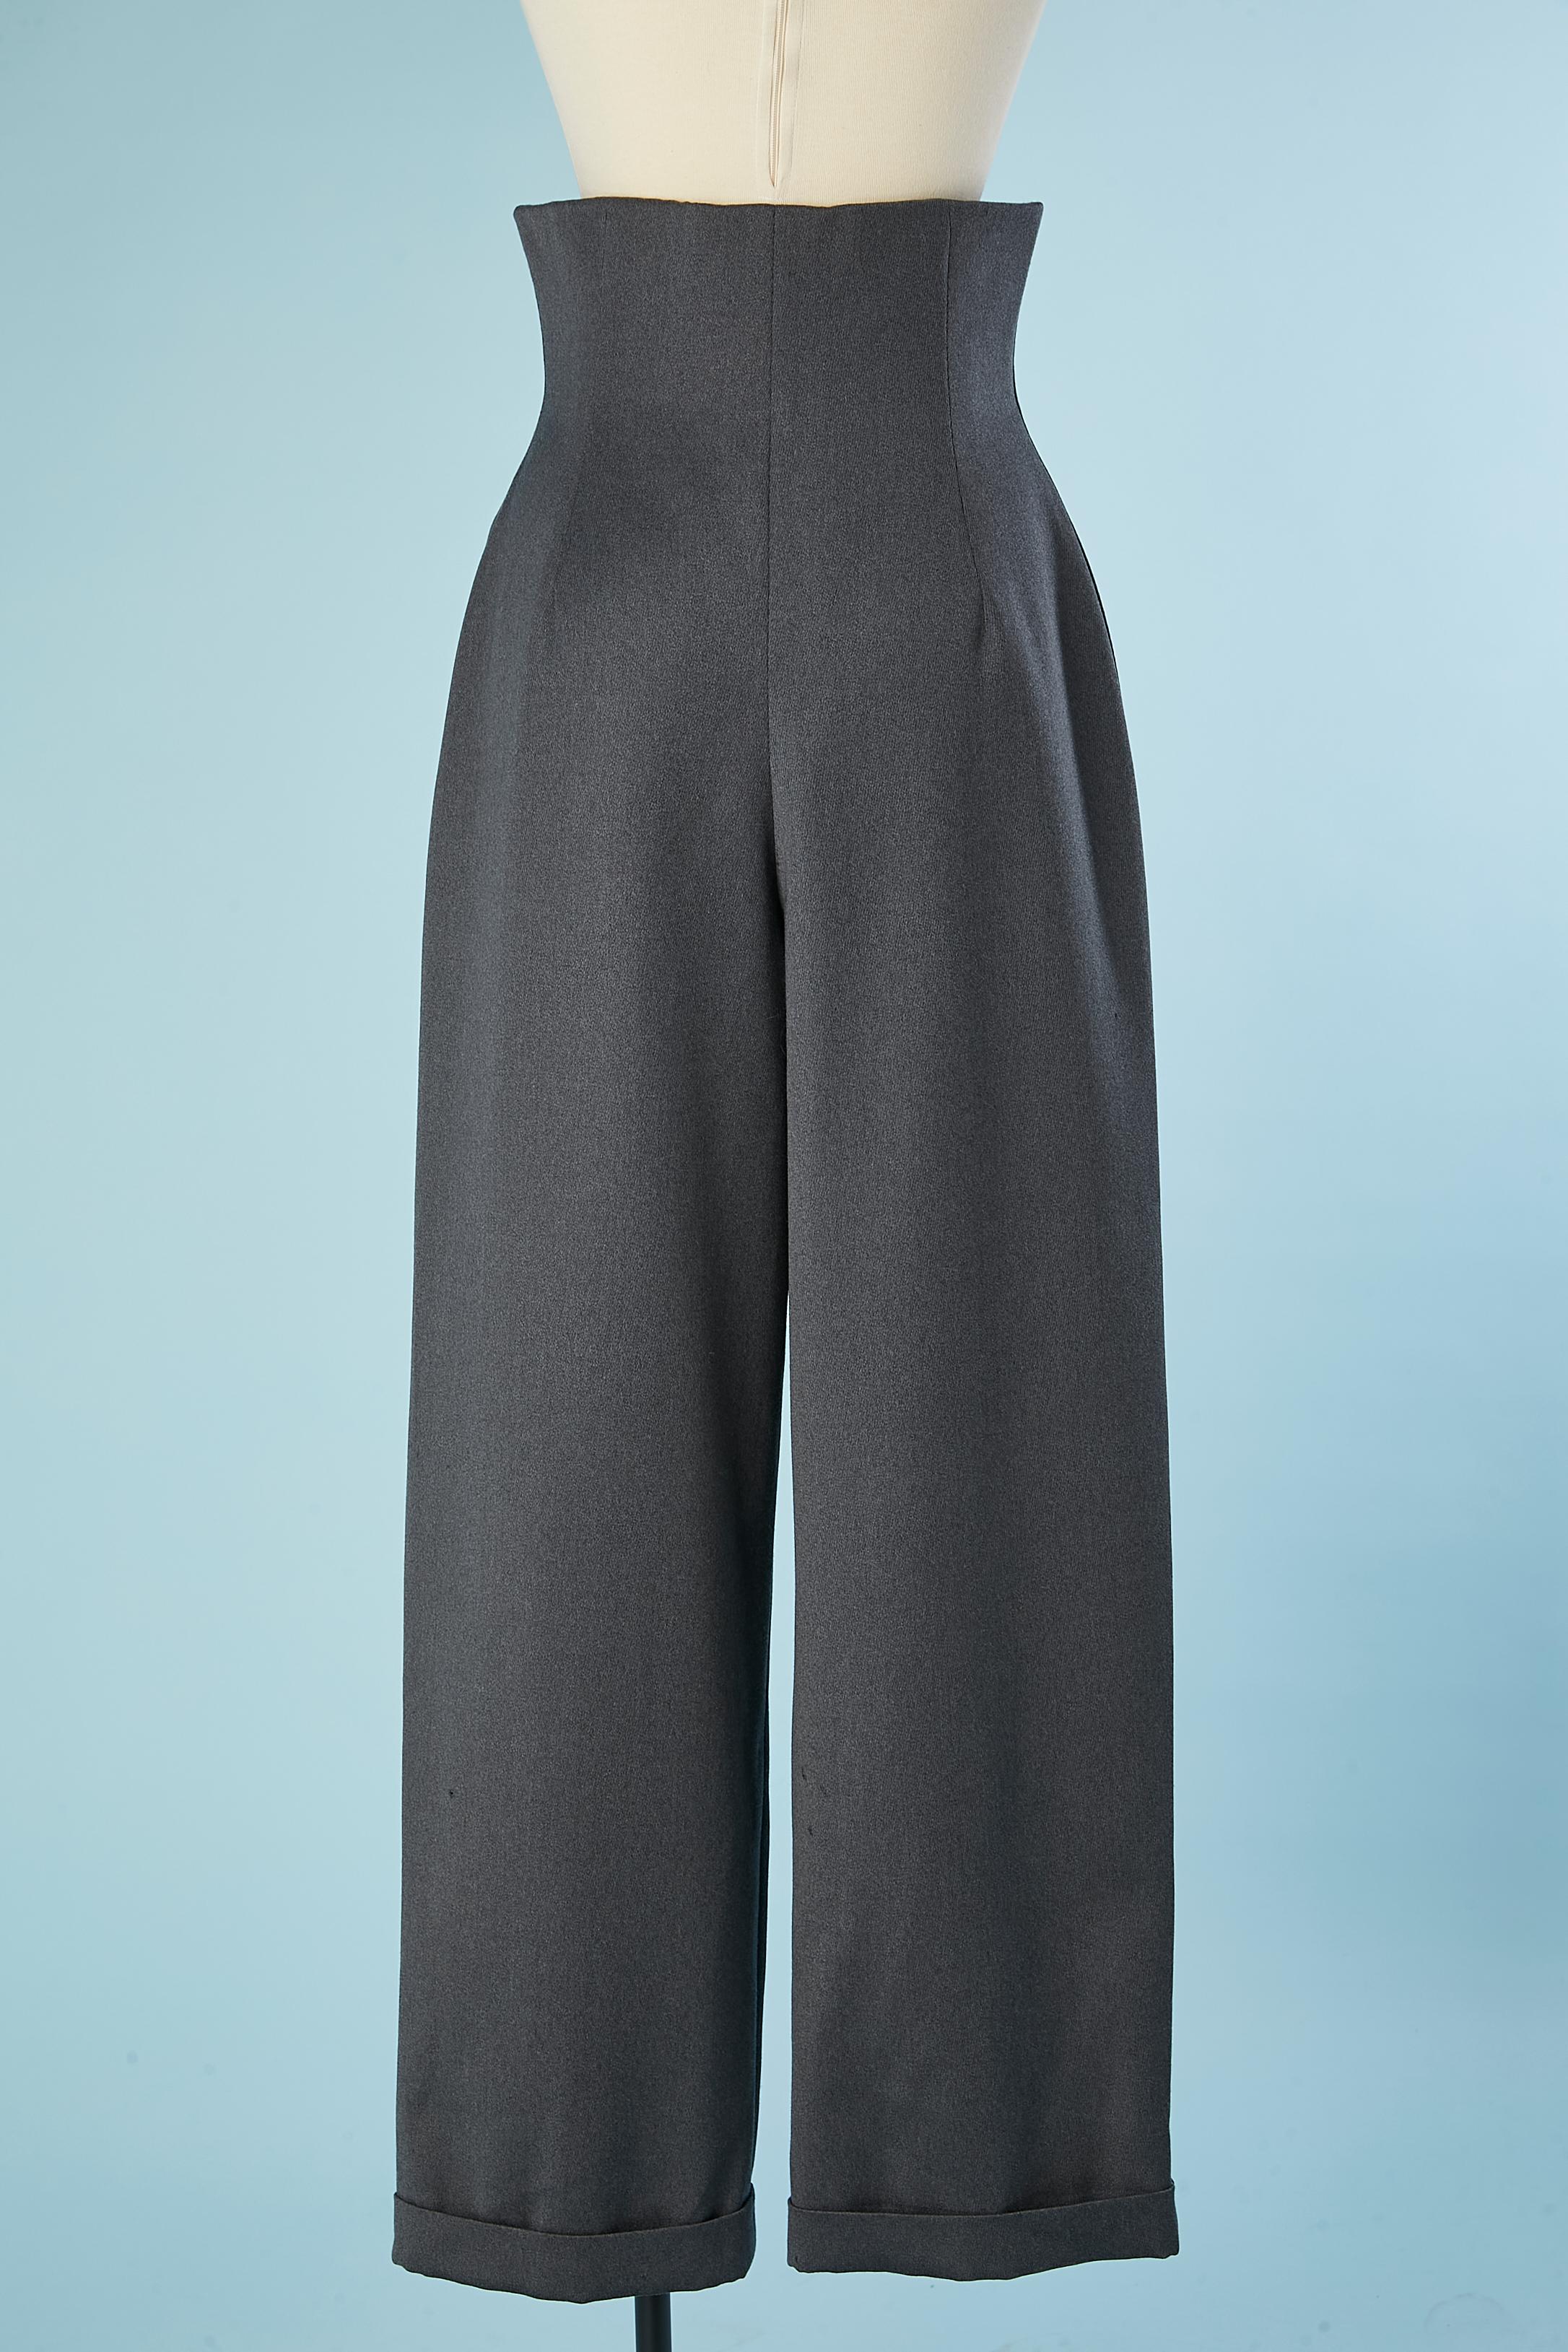 Women's Grey wool high-waisted trouser Christian Lacroix Luxe Paris 